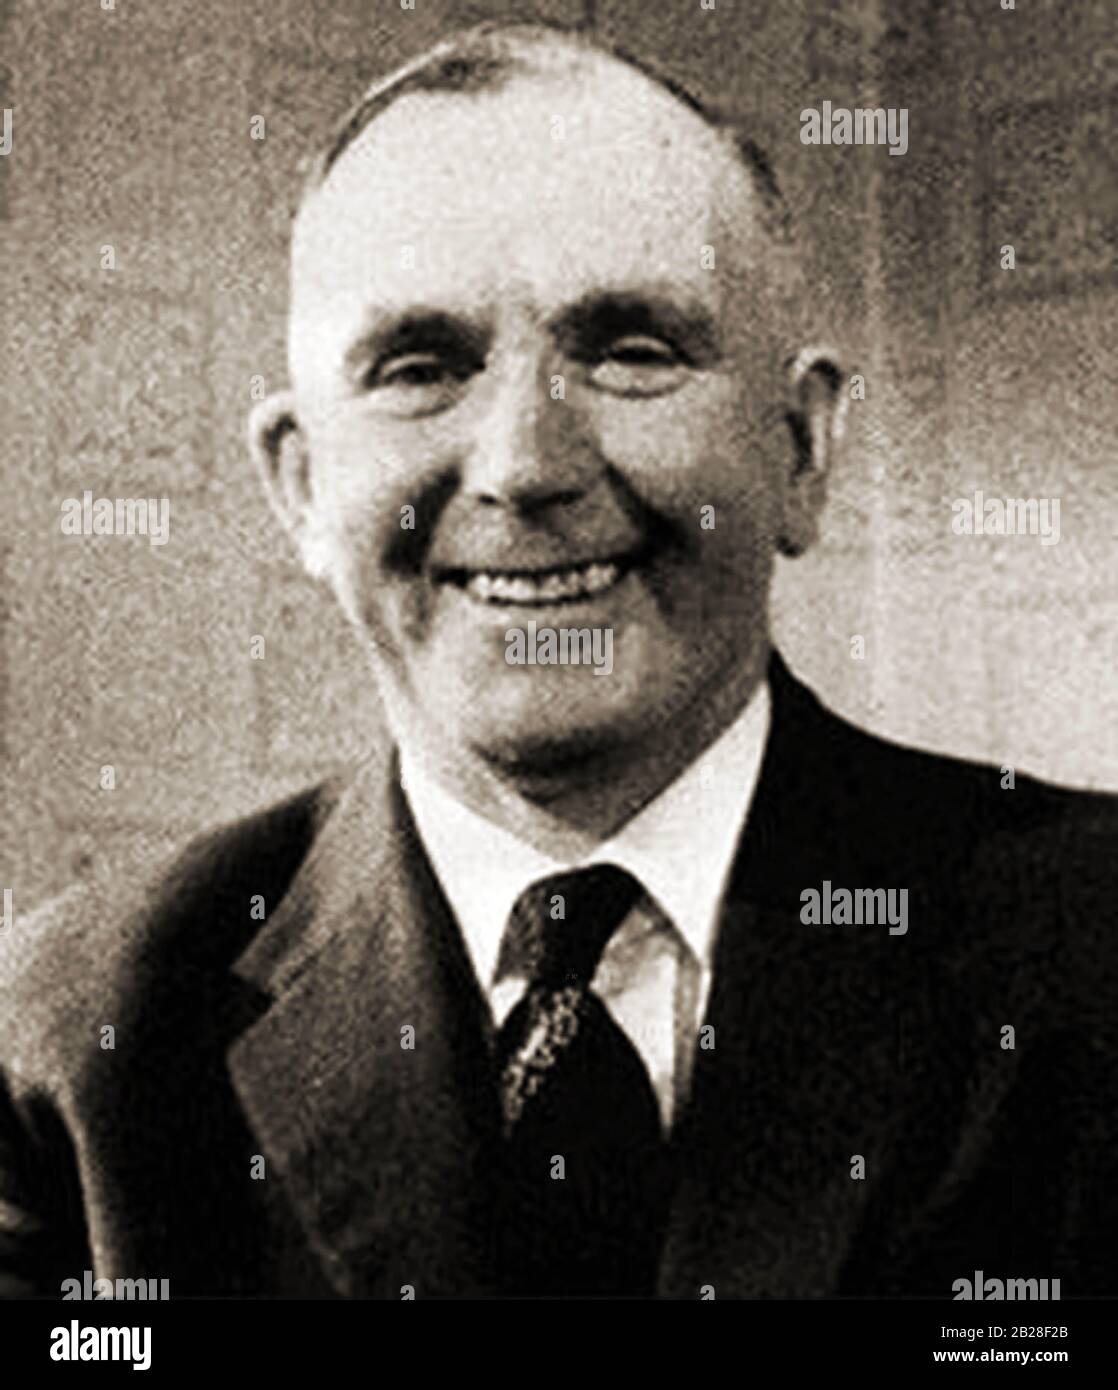 A portrait of Albert  Pierrepoint (1905-1992)  from Clayton West Yorkshire who was Britain's most prolific hangman. It was in effect a family business as his father, Henry, and uncle Thomas were  both official hangmen before him.during his career he hung a large number of criminals including those convicted of war crimes. He also hung Ruth Ellis, the last woman to be hung in Britain, and  the wartime traitor William Joyce (also known as Lord Haw-Haw) Stock Photo